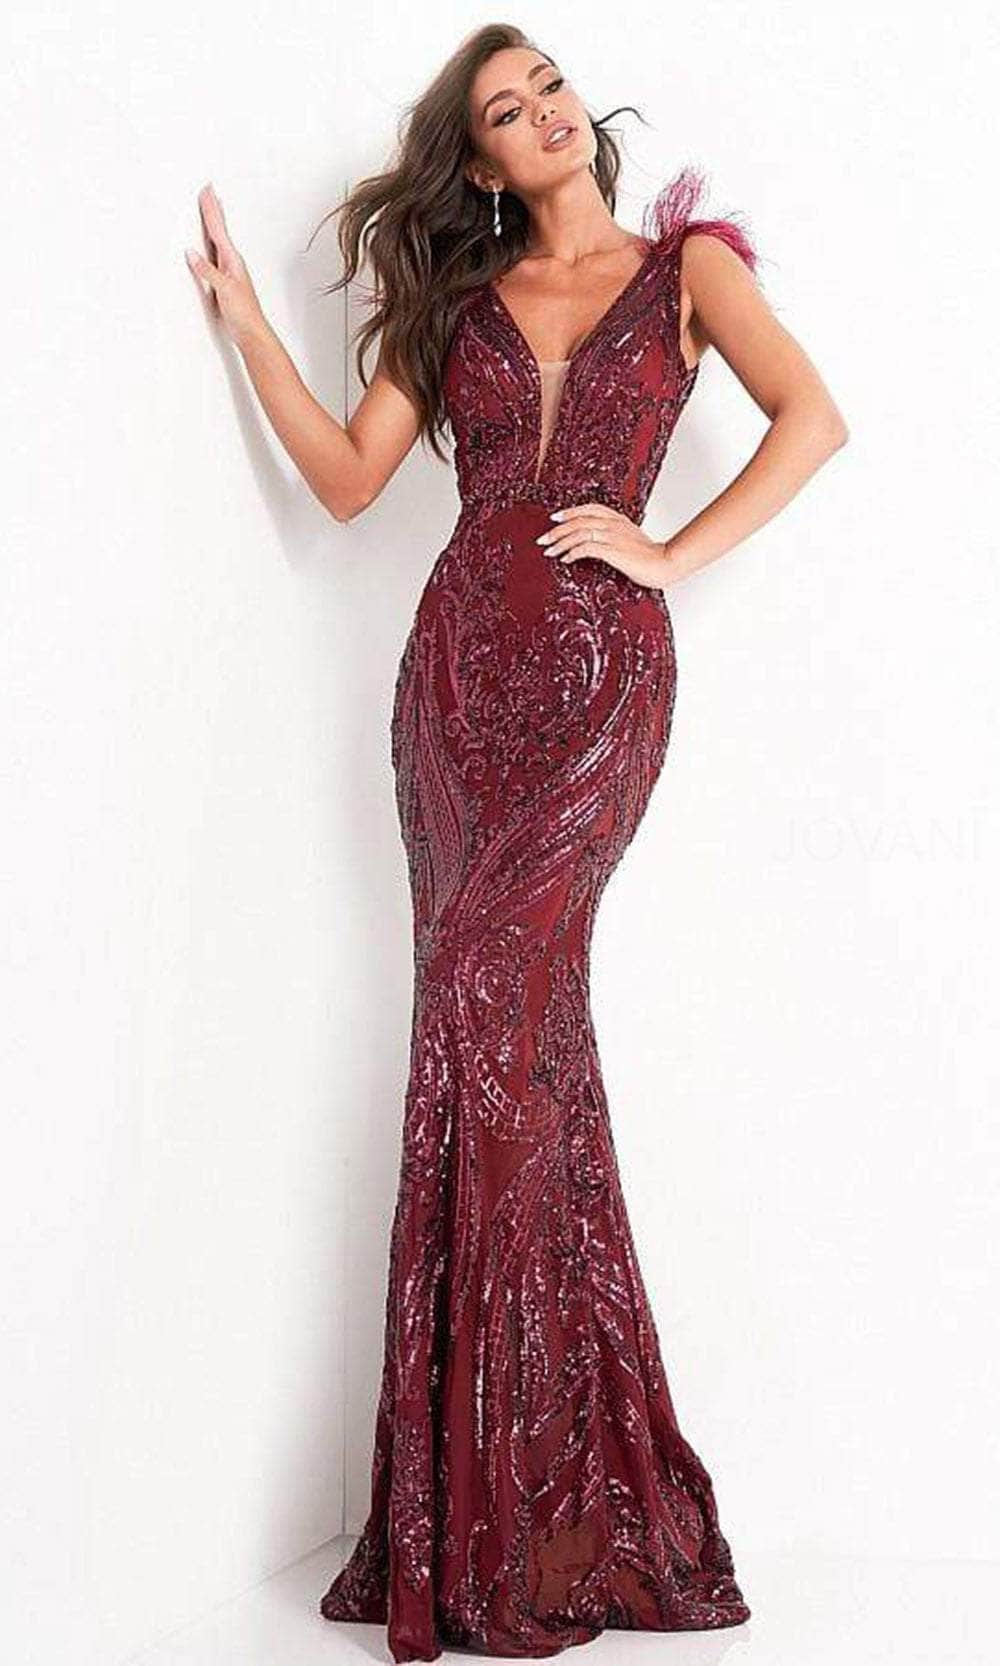 Jovani - 3180 Feathered Cap Sleeve Patterned Sequin Gown Prom Dresses